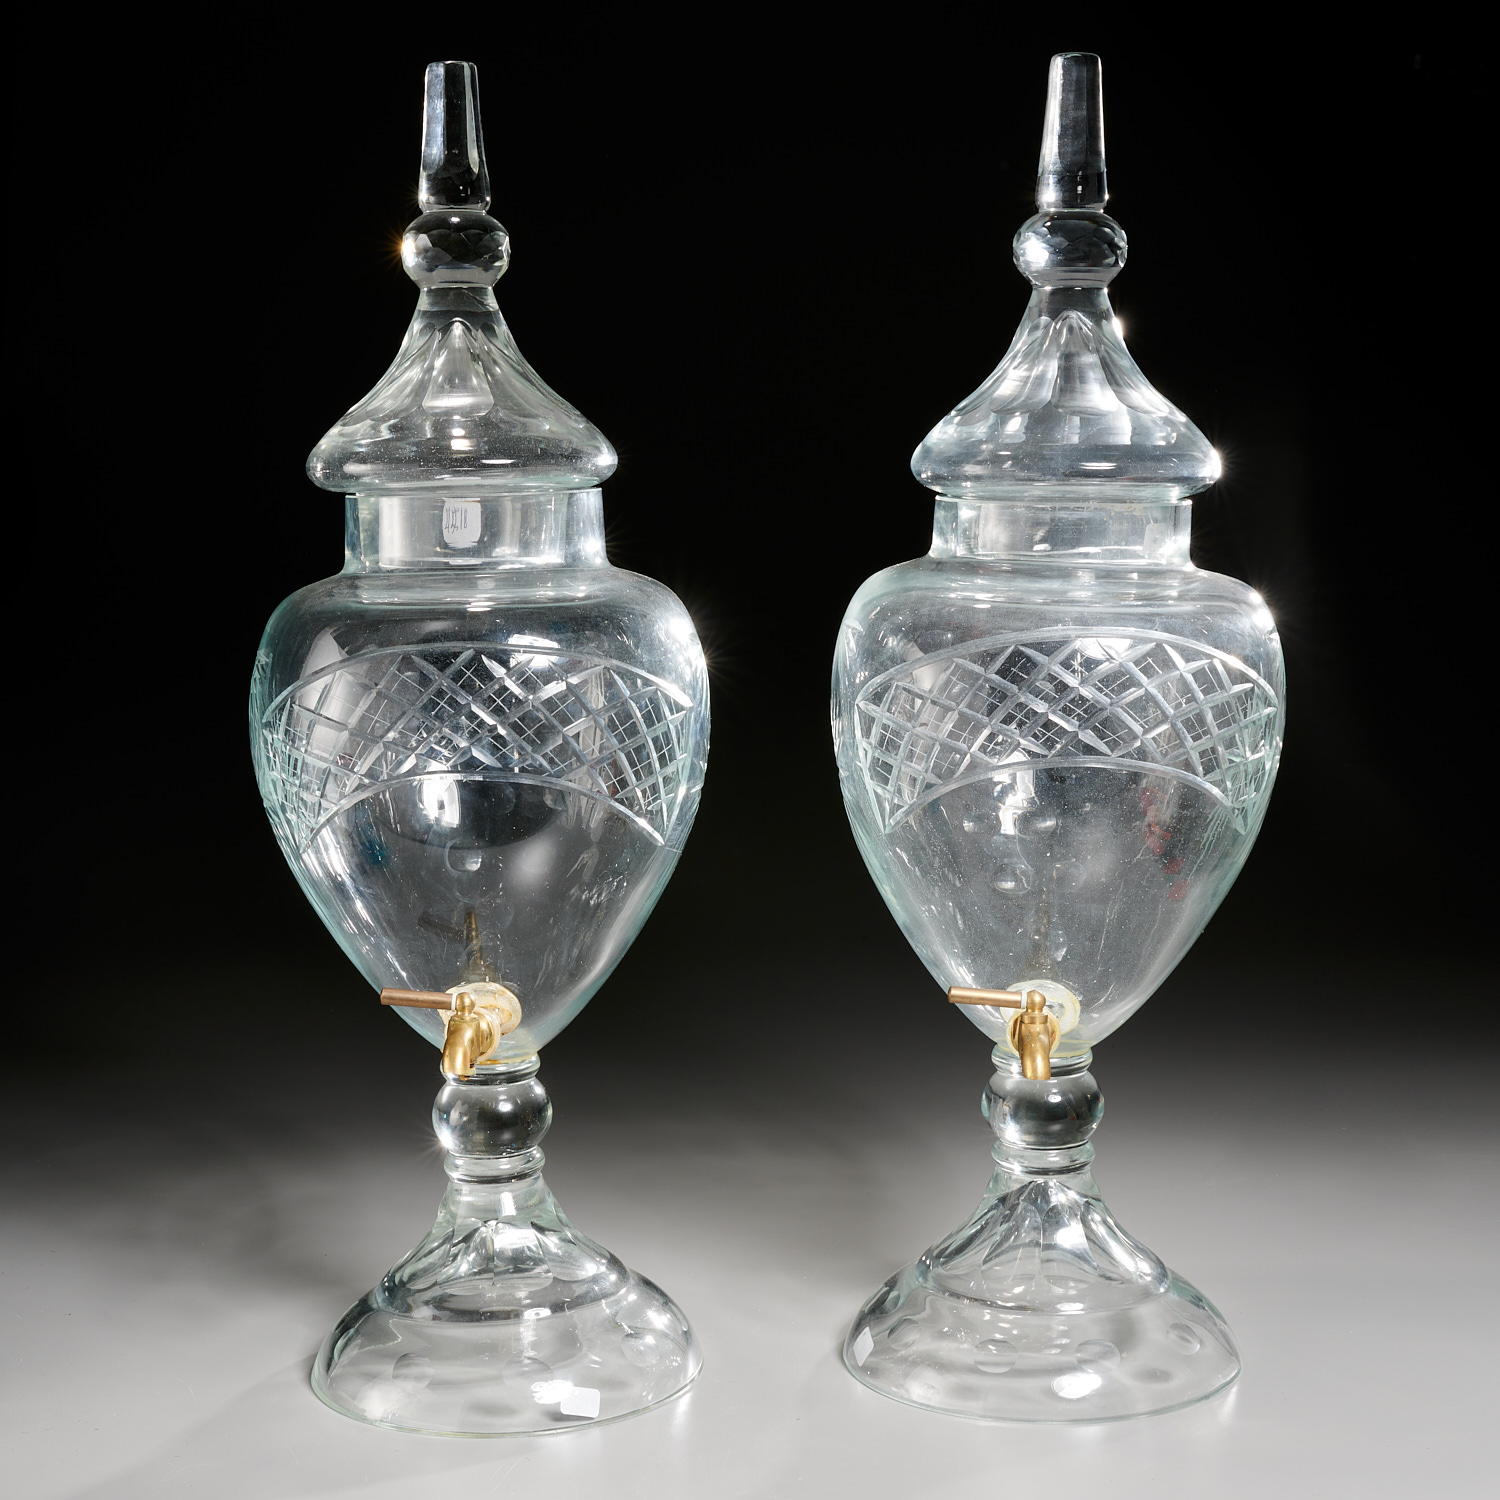 PAIR LARGE CUT GLASS APOTHECARY